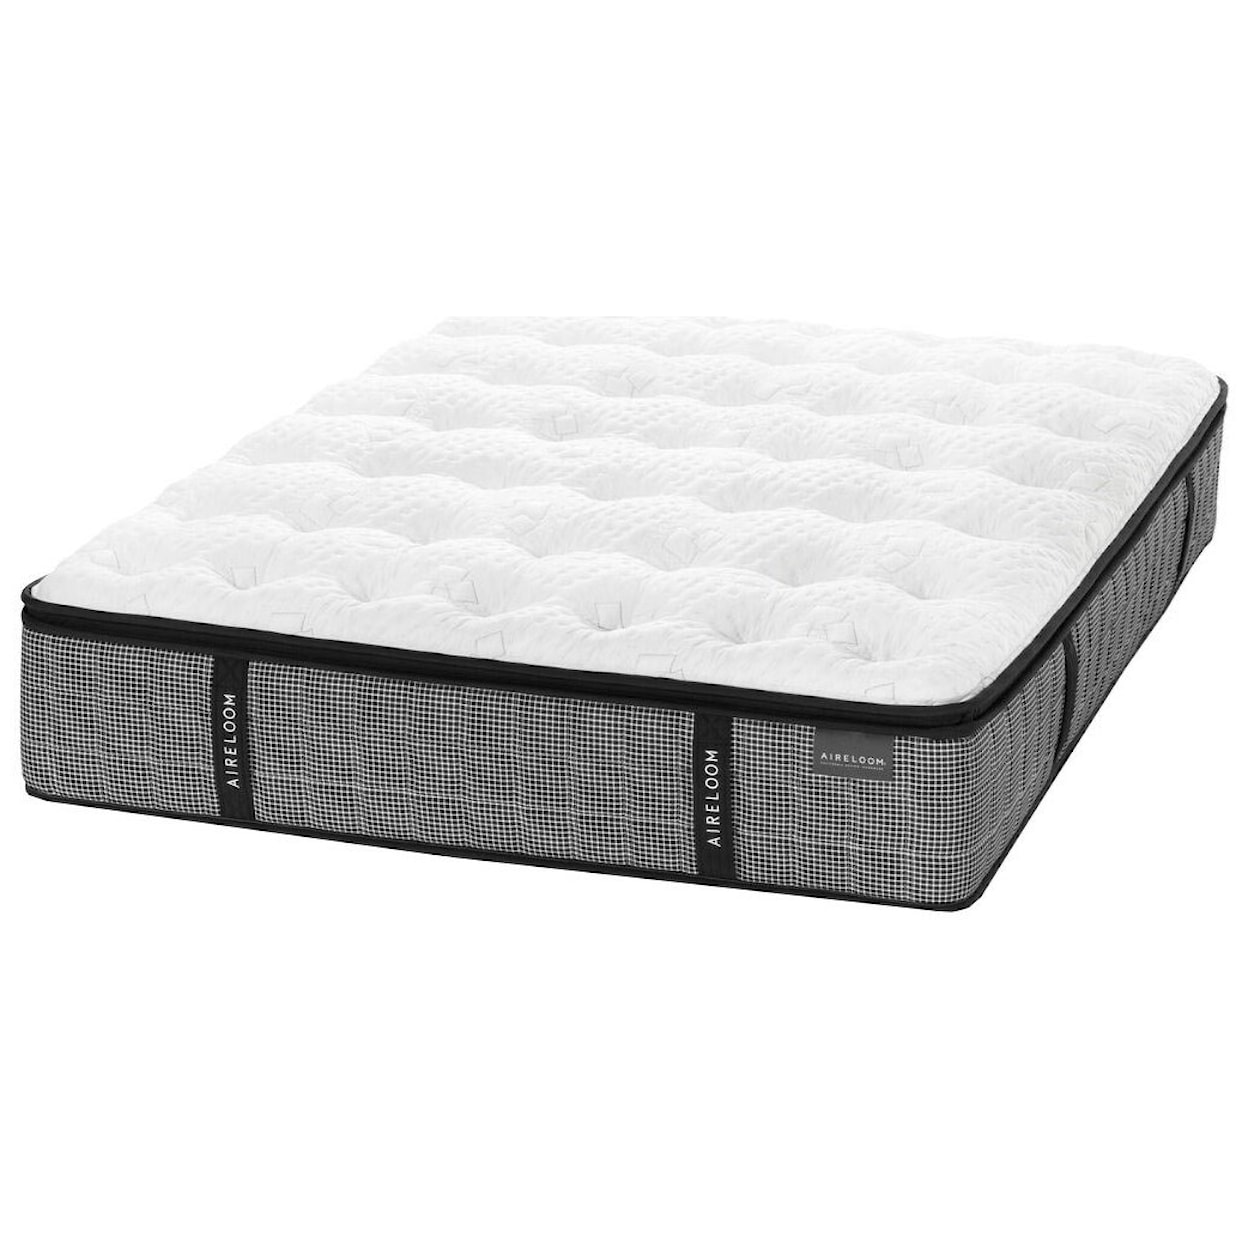 Aireloom Bedding PP Crystal Cove Firm Queen Luxetop™ Firm Micro Coil Mattress